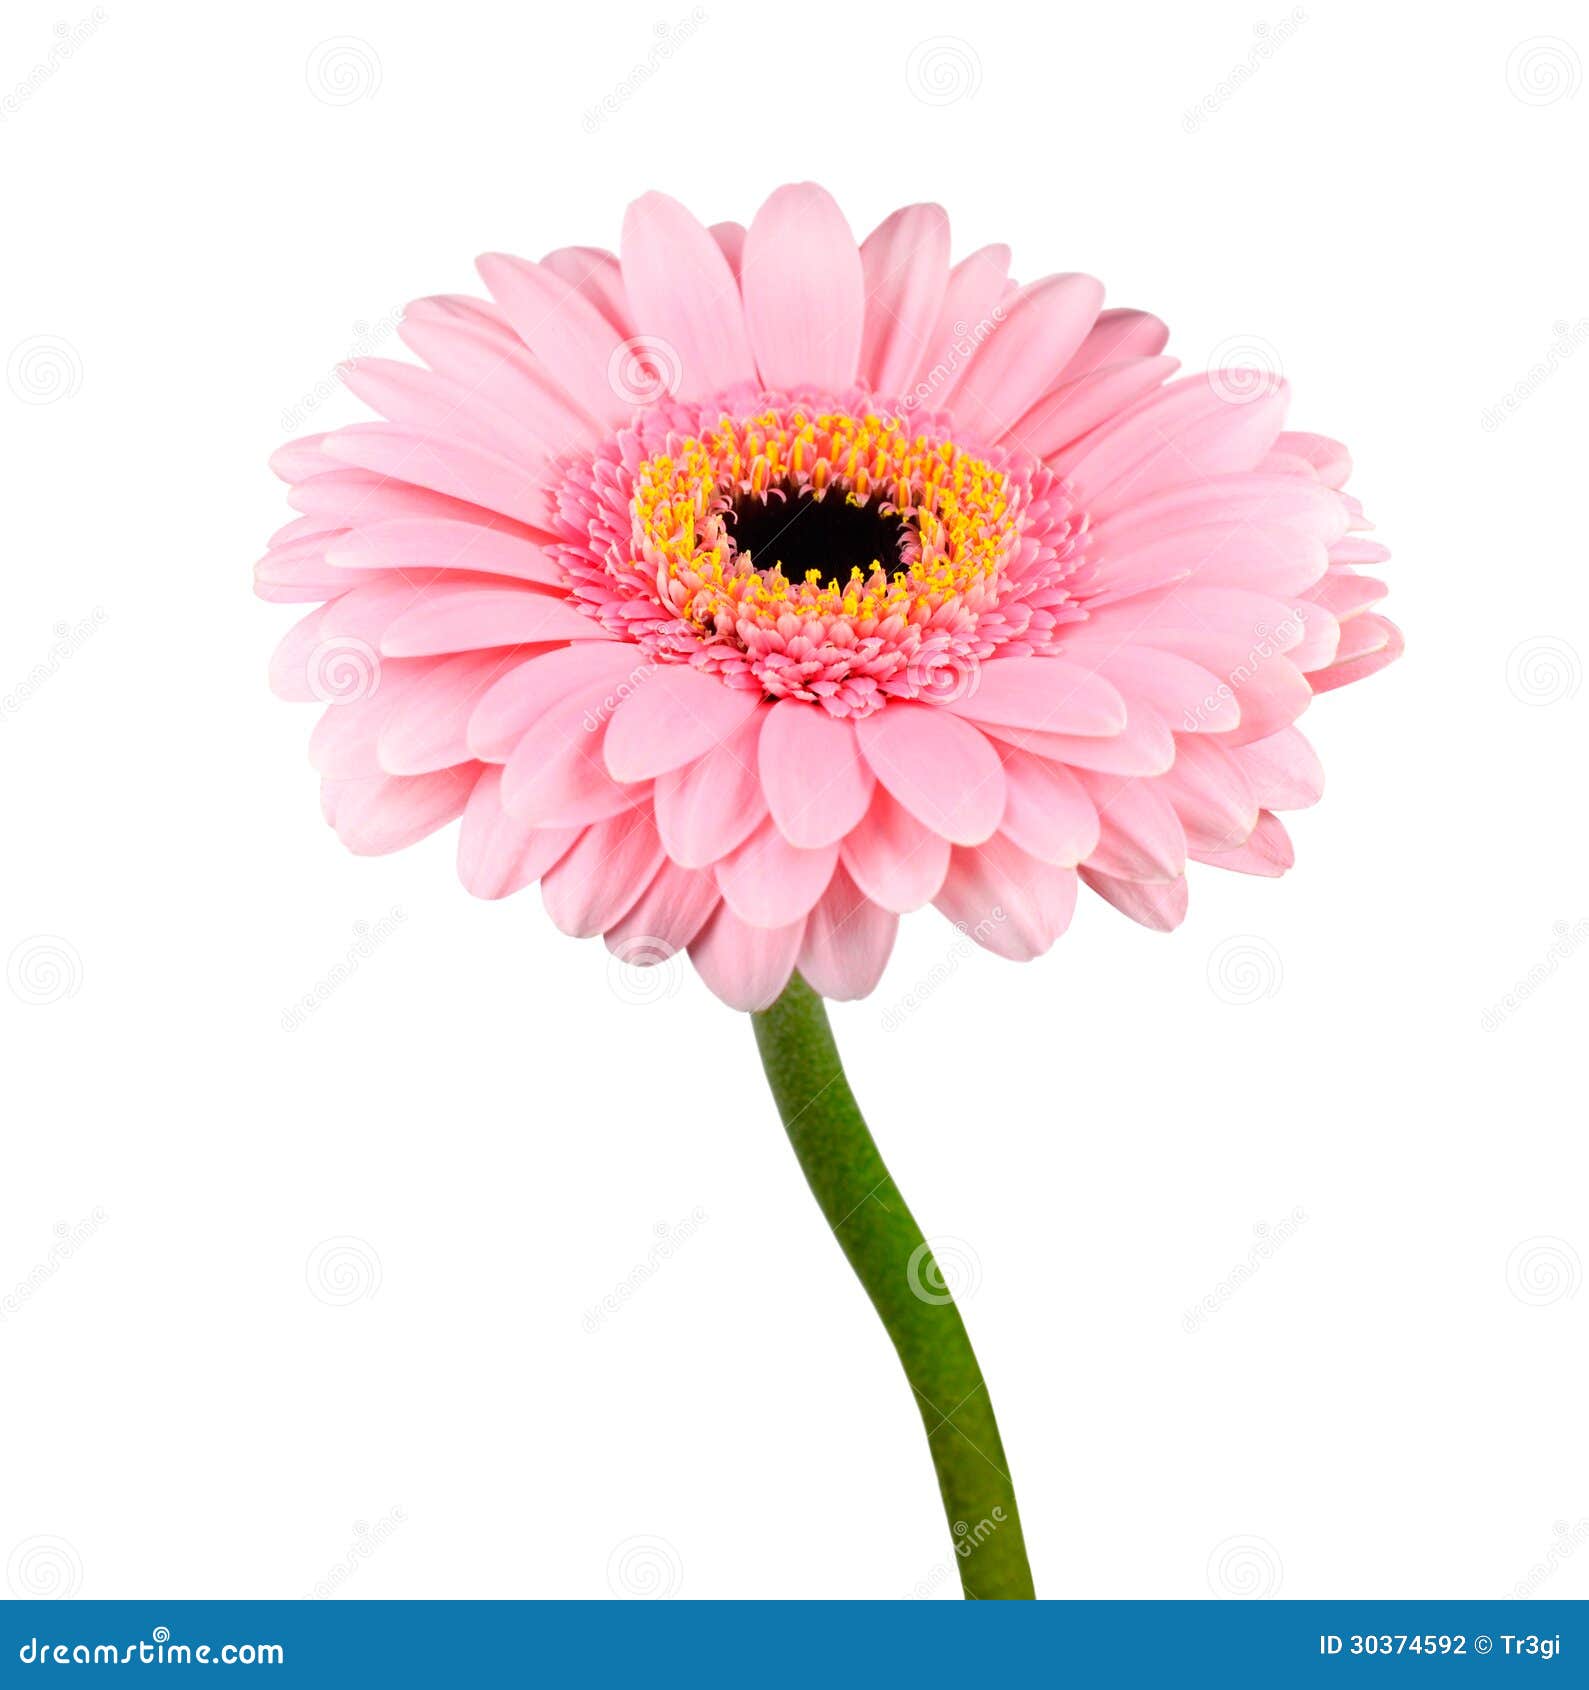 127,700+ Single Flower Stem Stock Photos, Pictures & Royalty-Free